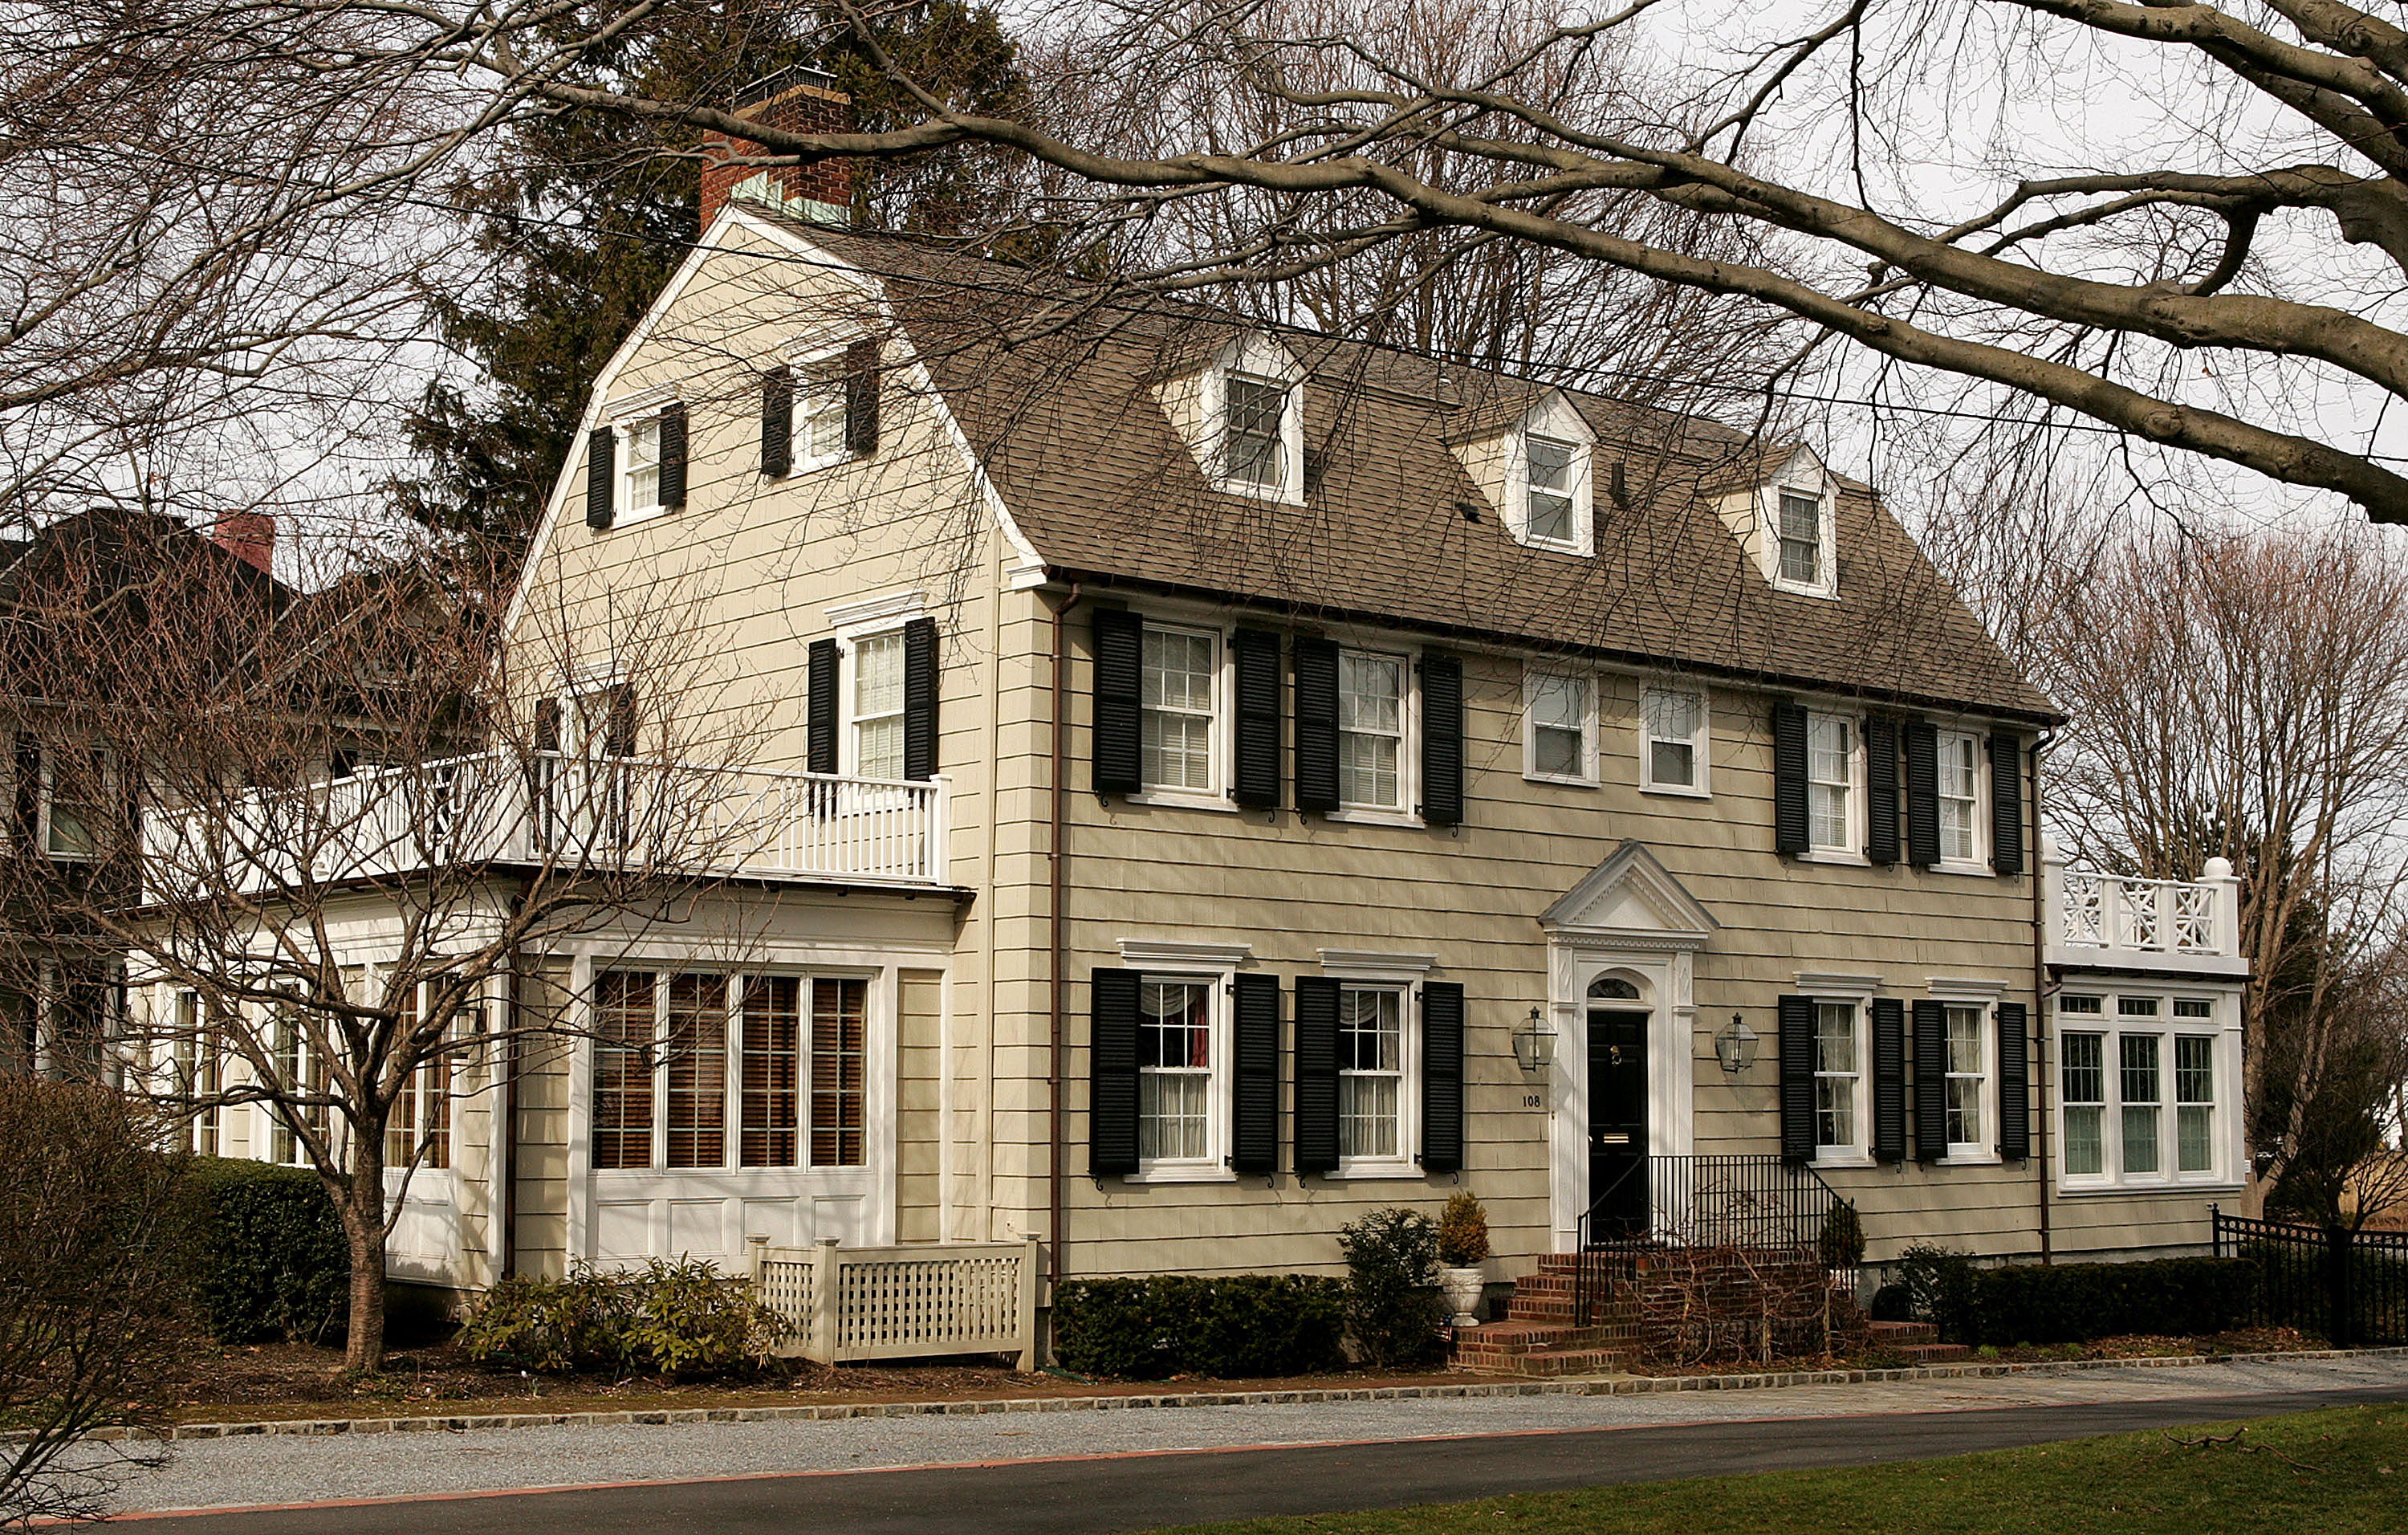 Netflix's 'The Watcher' home in New Jersey attracts unwanted